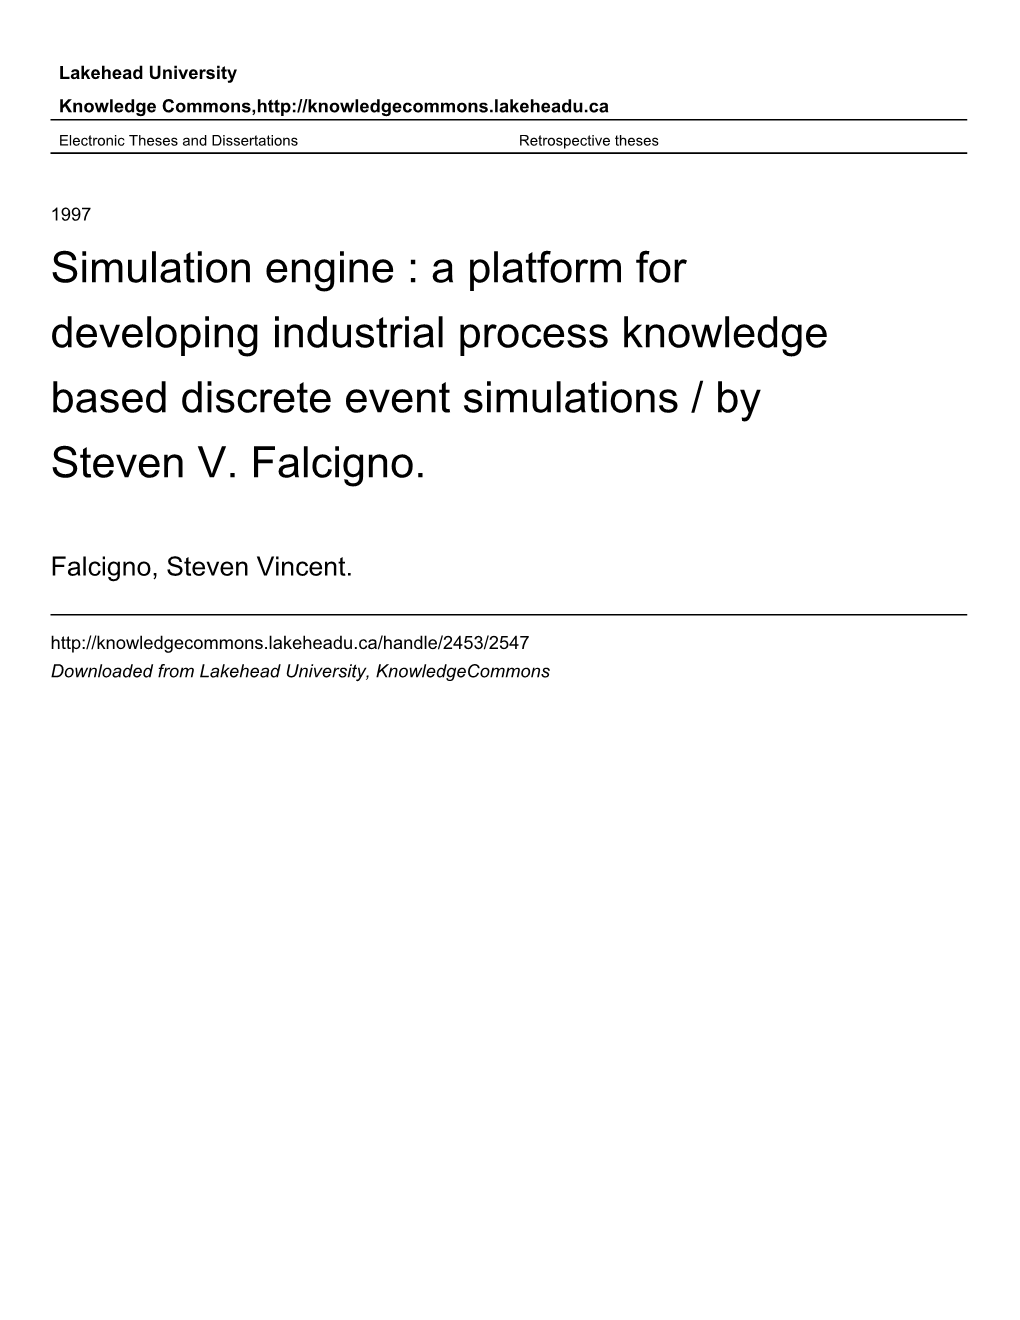 Simulation Engine : a Platform for Developing Industrial Process Knowledge Based Discrete Event Simulations / by Steven V